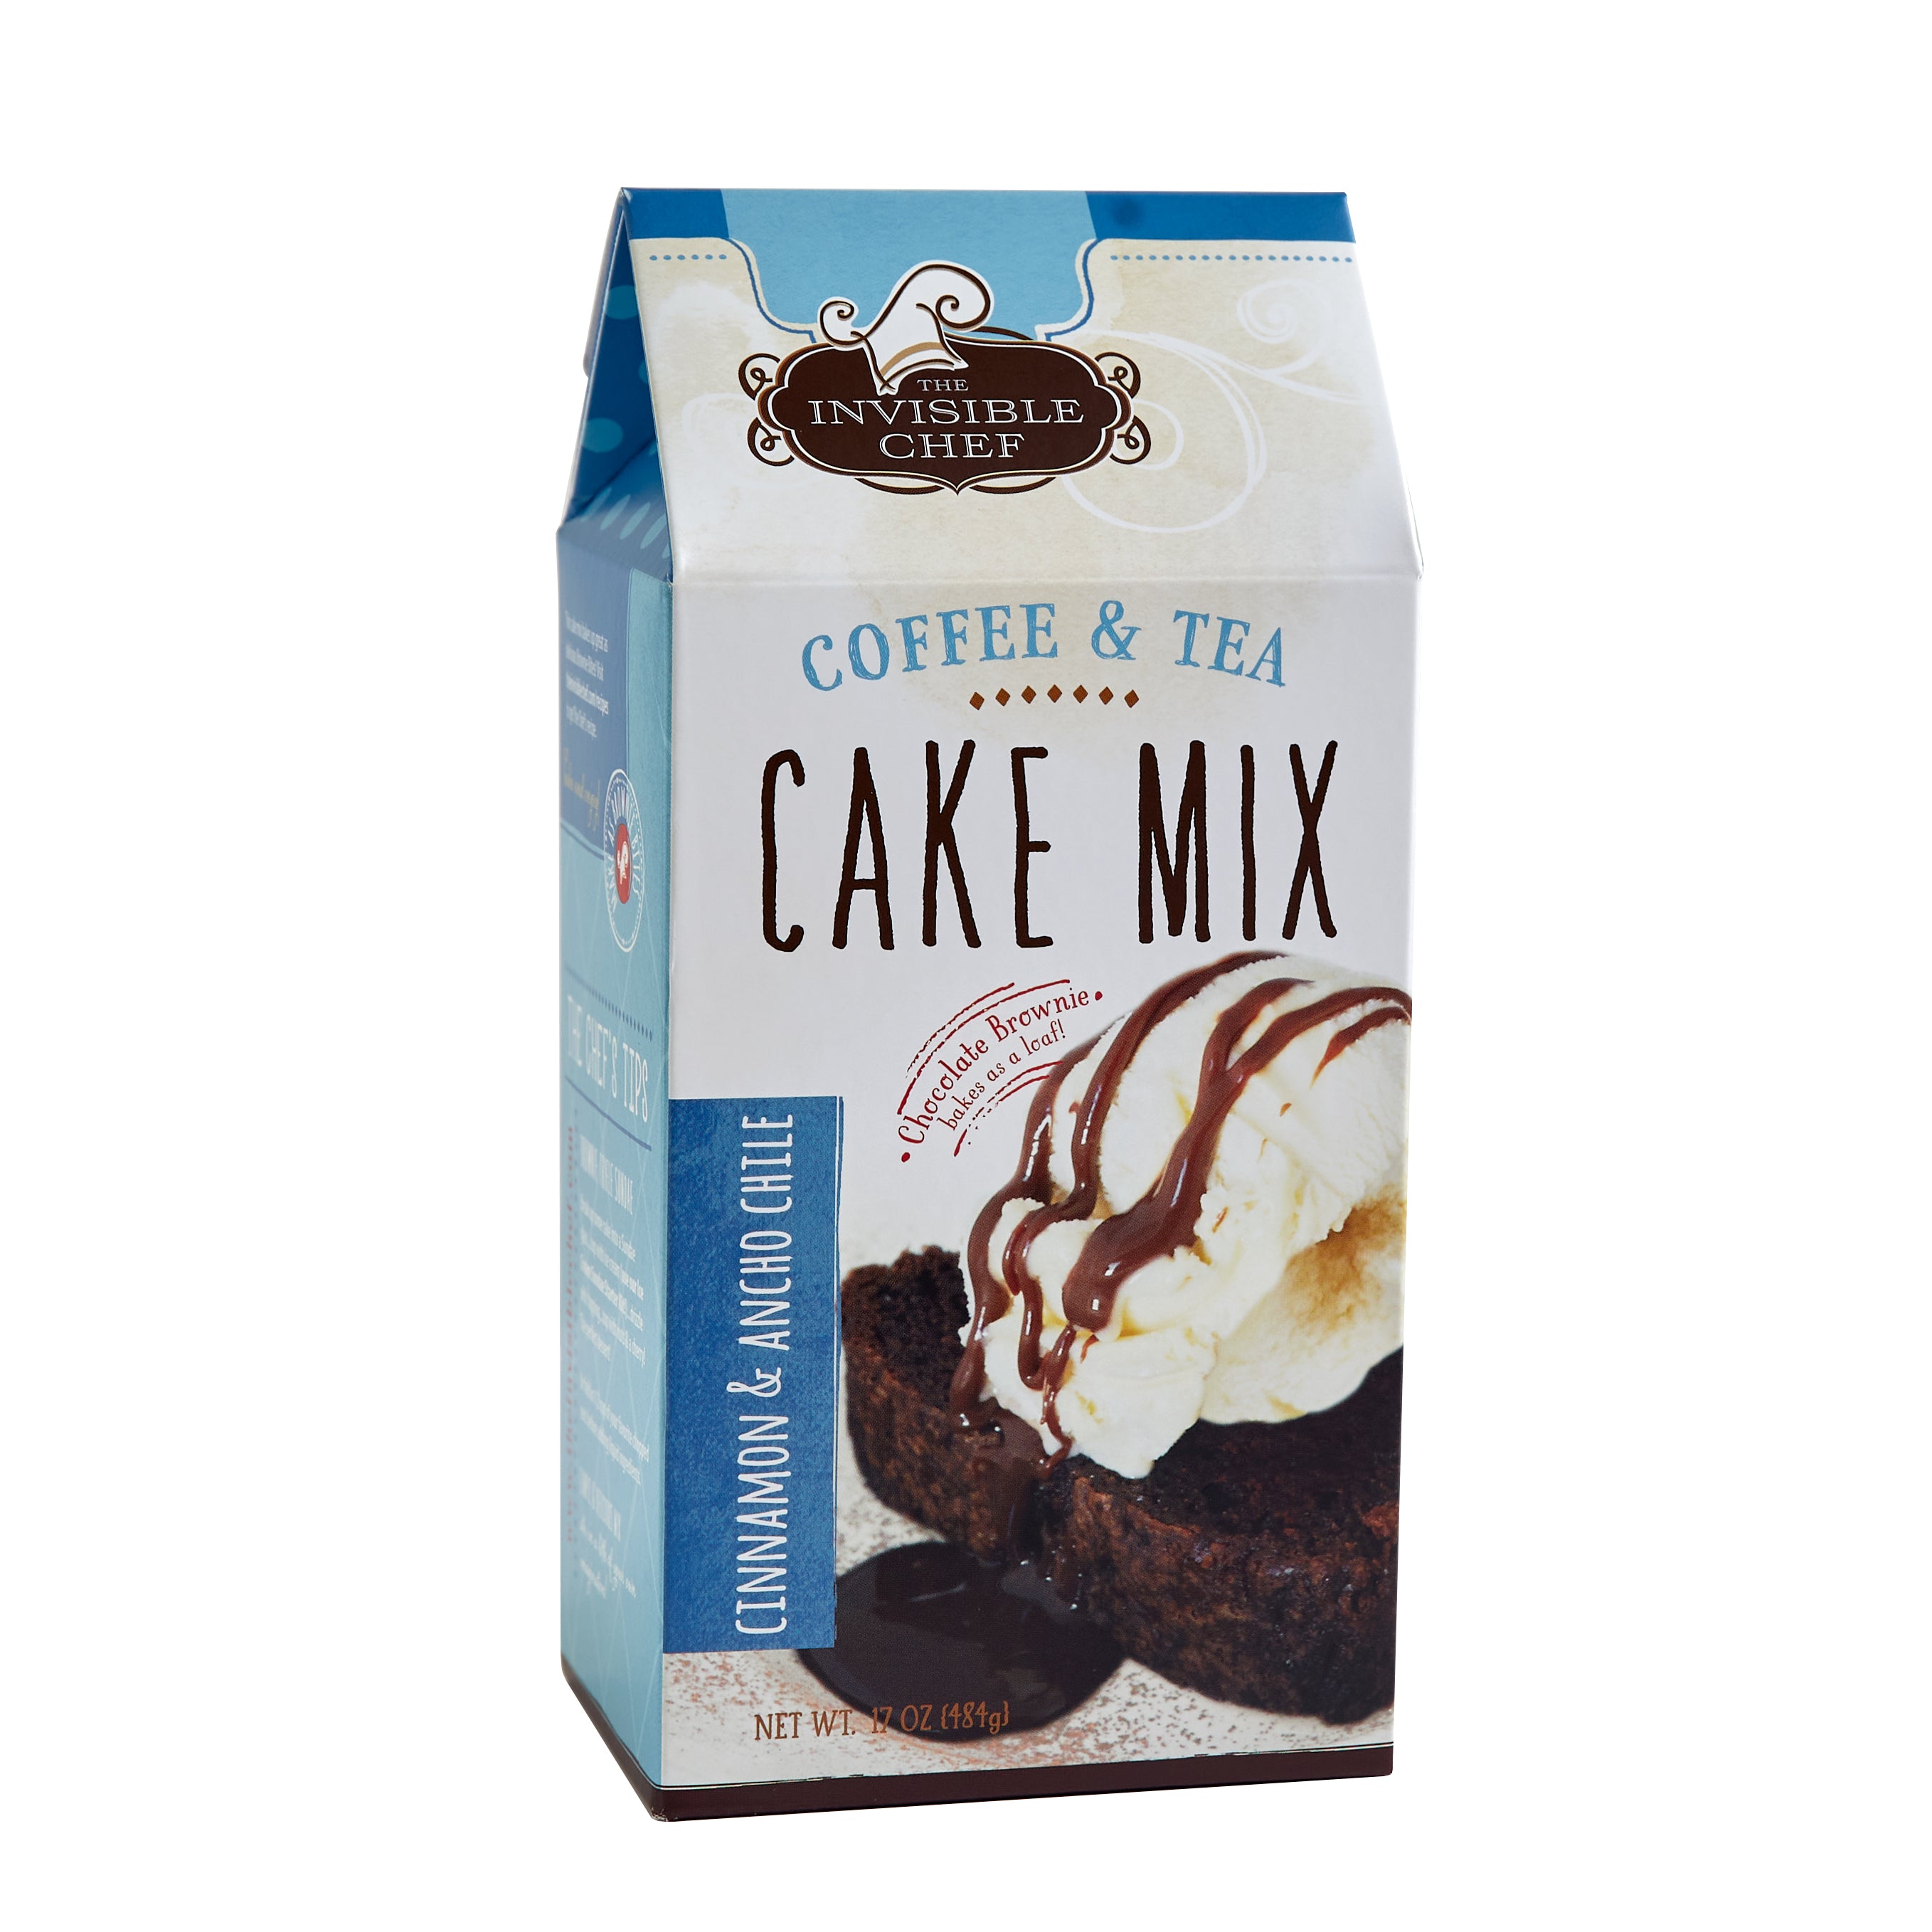 Aldi UK - Cakes for a special treat, such as our Heavenly Desserts  Chocolate Fudge Cake, £1.49 for 450g | Facebook